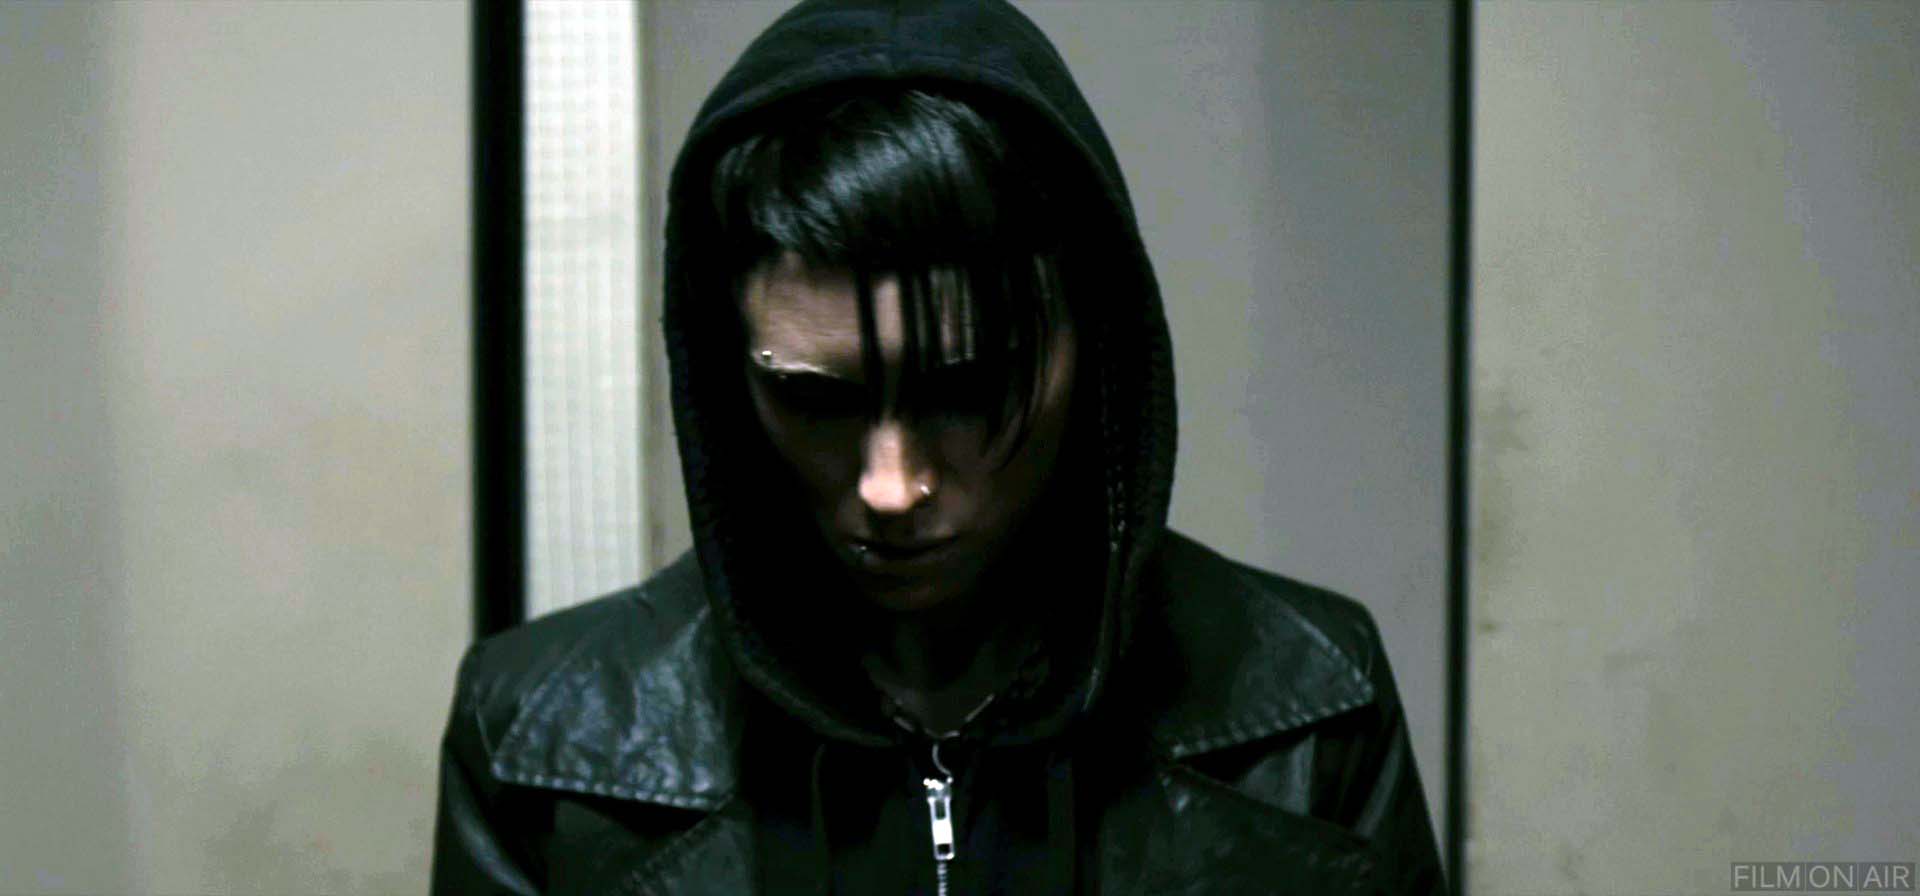 Girl With The Dragon Tattoo Looks Down
 in The Girl with the Dragon Tattoo in The Girl with the Dragon Tattoo